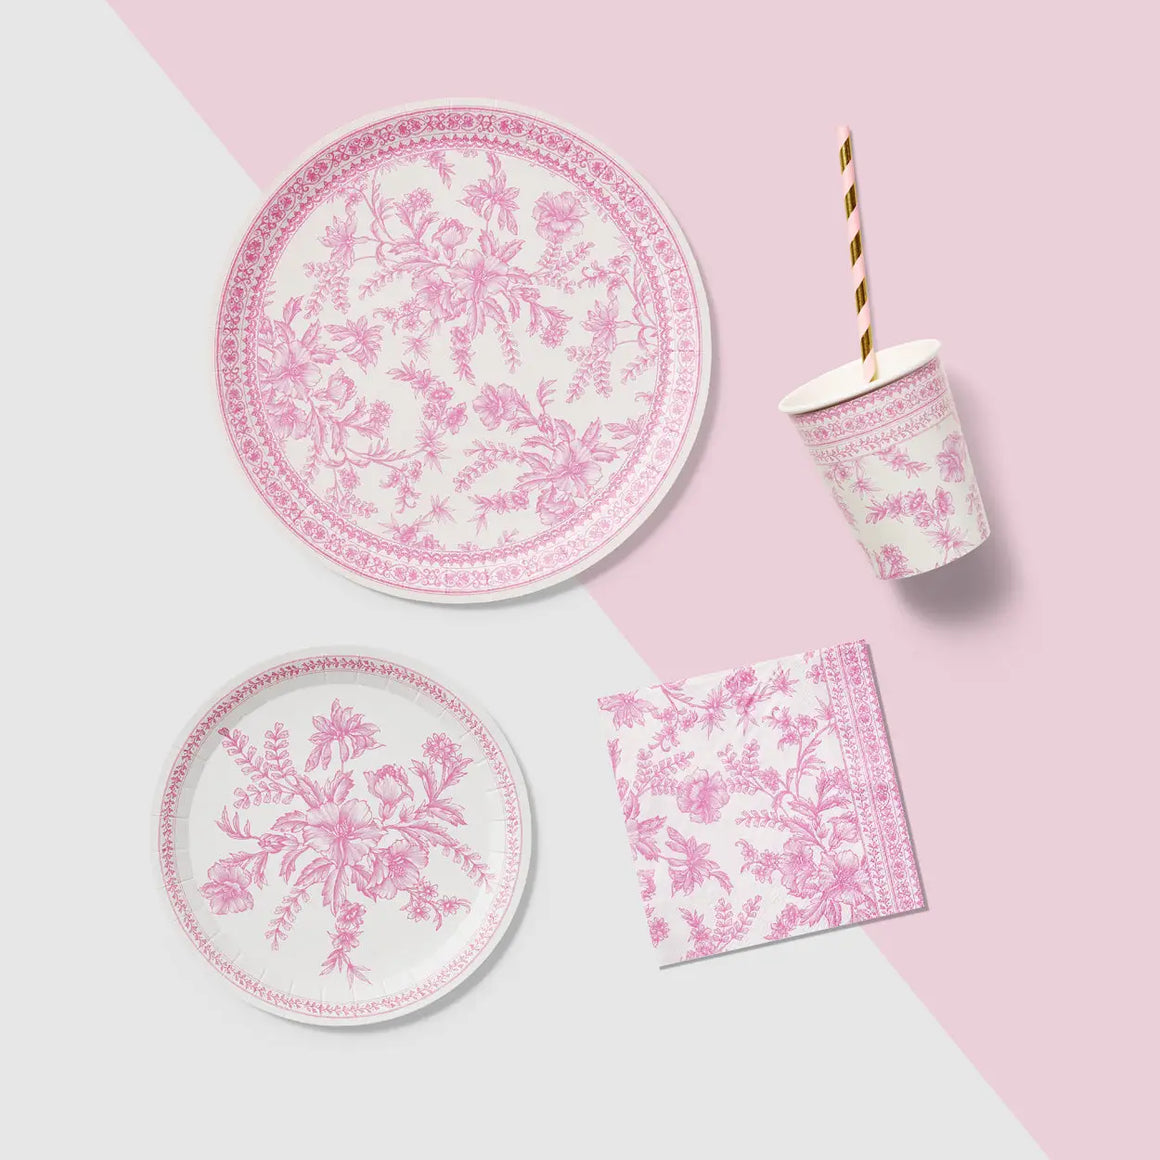 PLATES SMALL - FLORAL PINK FRENCH TOILE